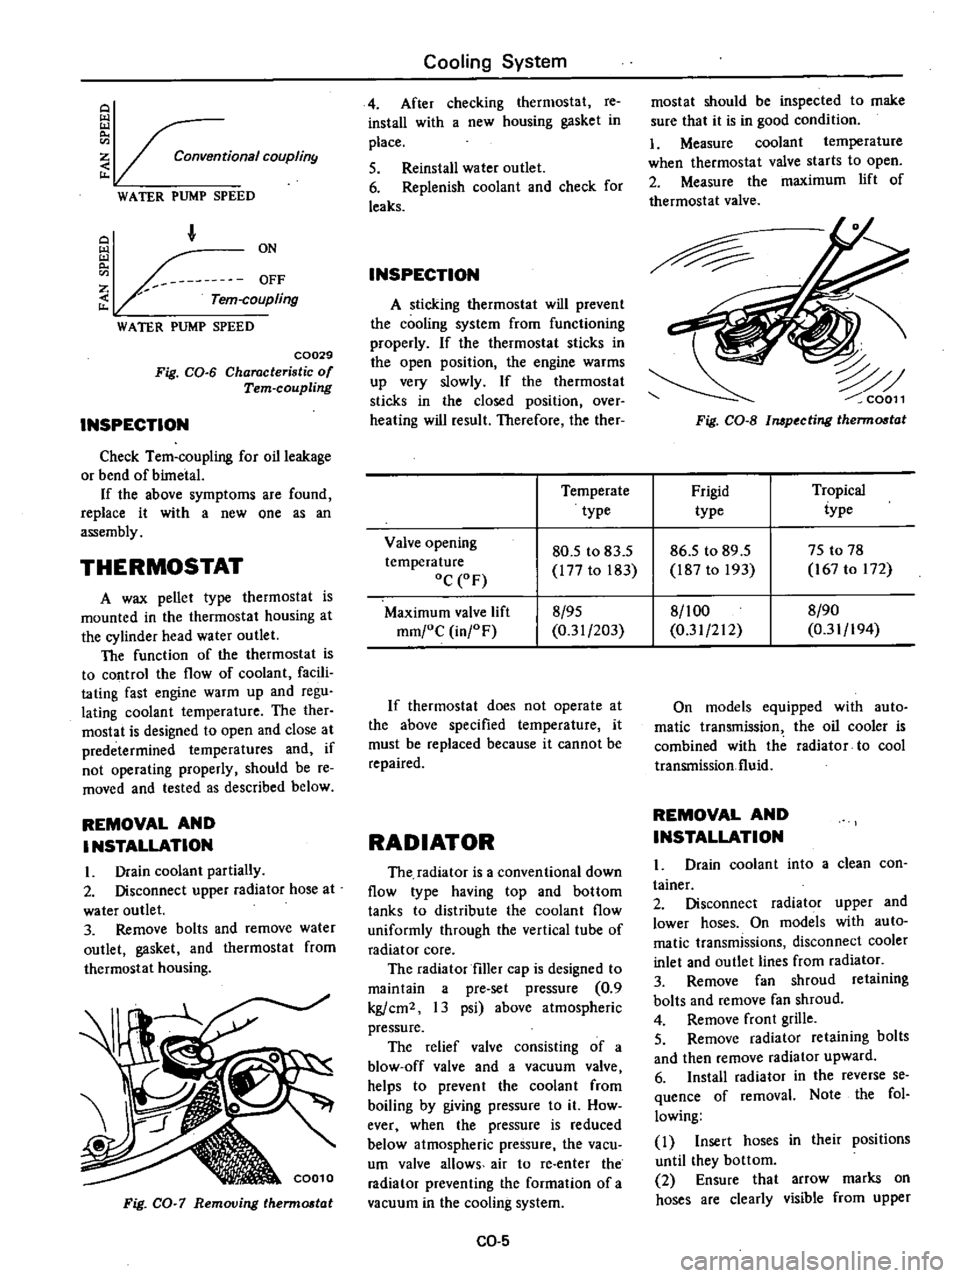 DATSUN PICK-UP 1977  Service Manual 
Conventional

COUplin9

WATER 
PUMP 
SPEED

F

Z

Tern

coupling

WATER 
PUMP

SPEED

C0029

Fig 
CO 
6 
Characteristic

of

Tern 
coupling

INSPECTION

Check 
Tem

coupling 
for 
oil

leakage

or 
b